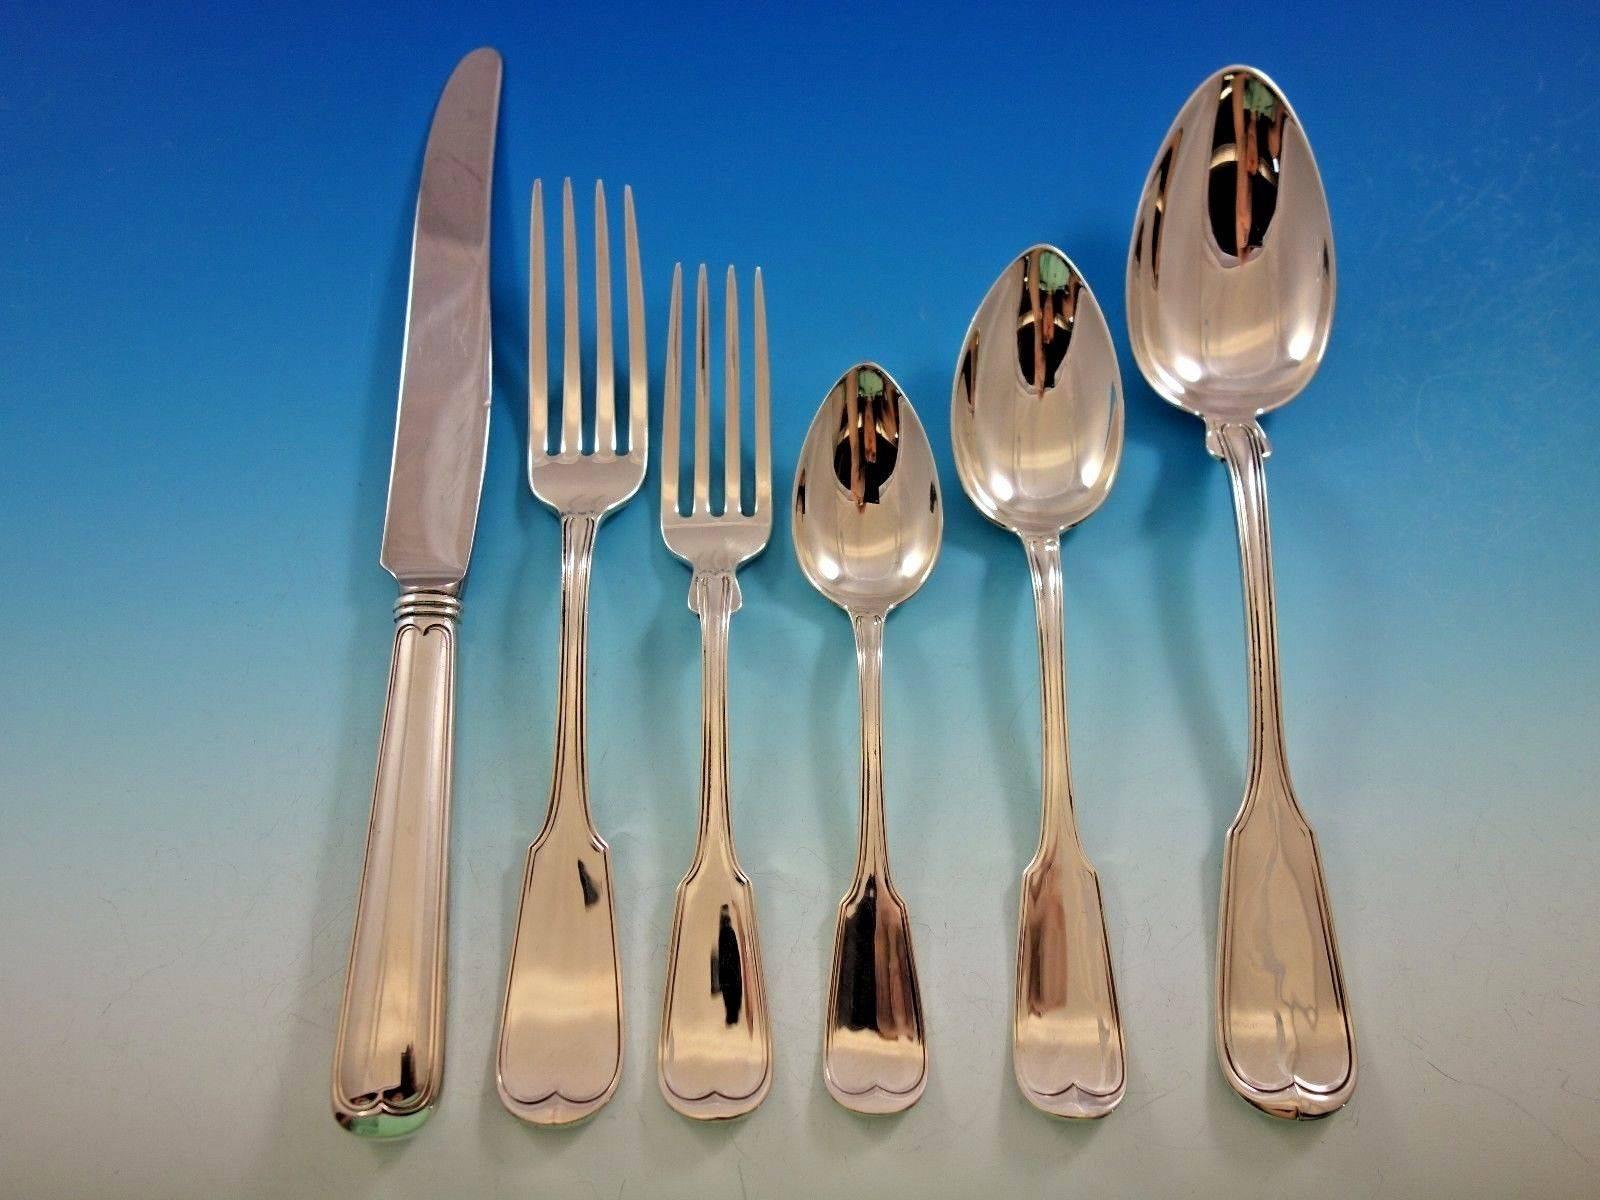 Threaded antique by Gorham sterling silver flatware set, 72 pieces. This set includes: 12 dinner size knives, 9 3/4